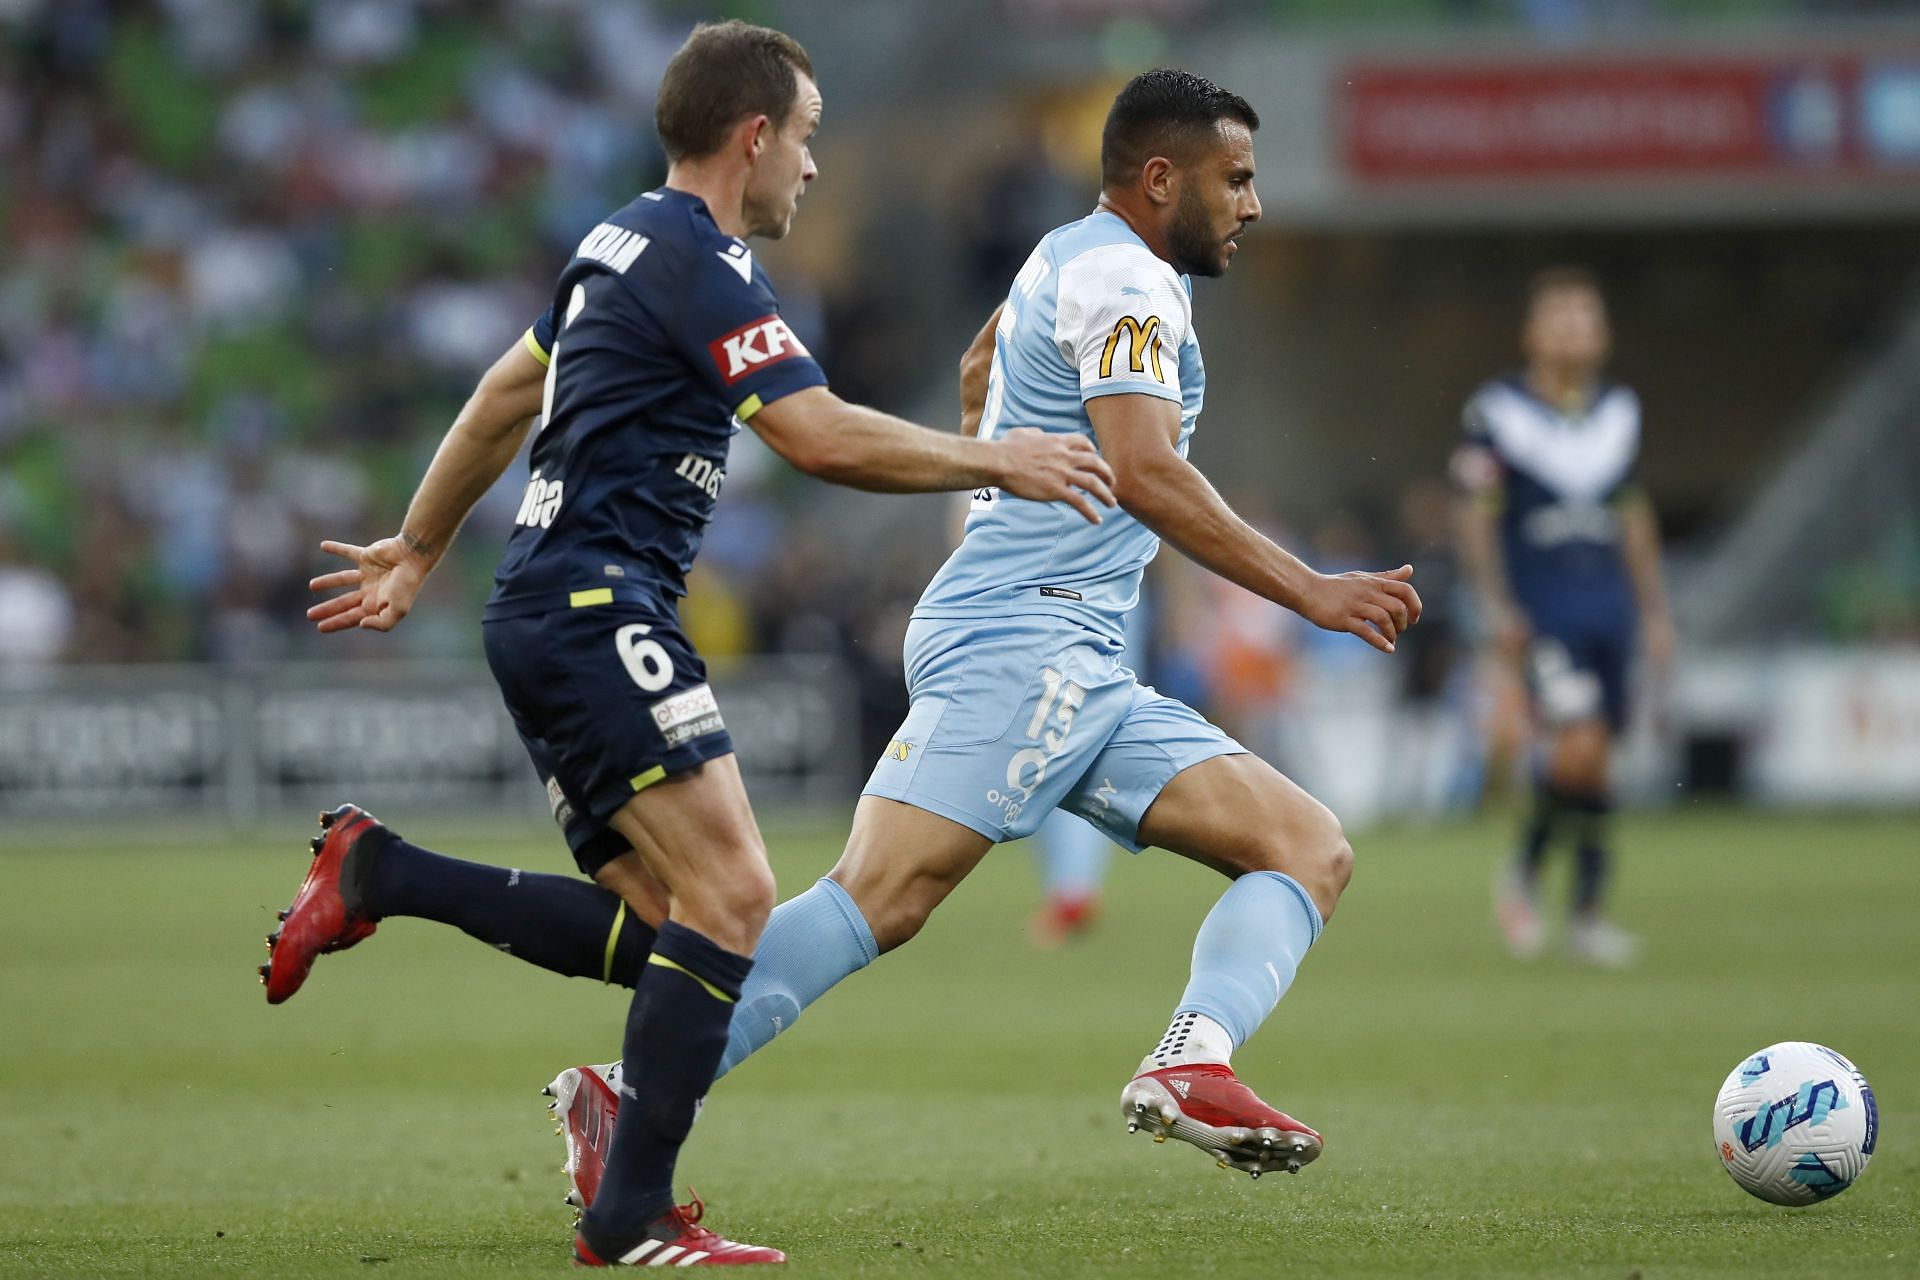 Melbourne City take on Melbourne Victory this weekend